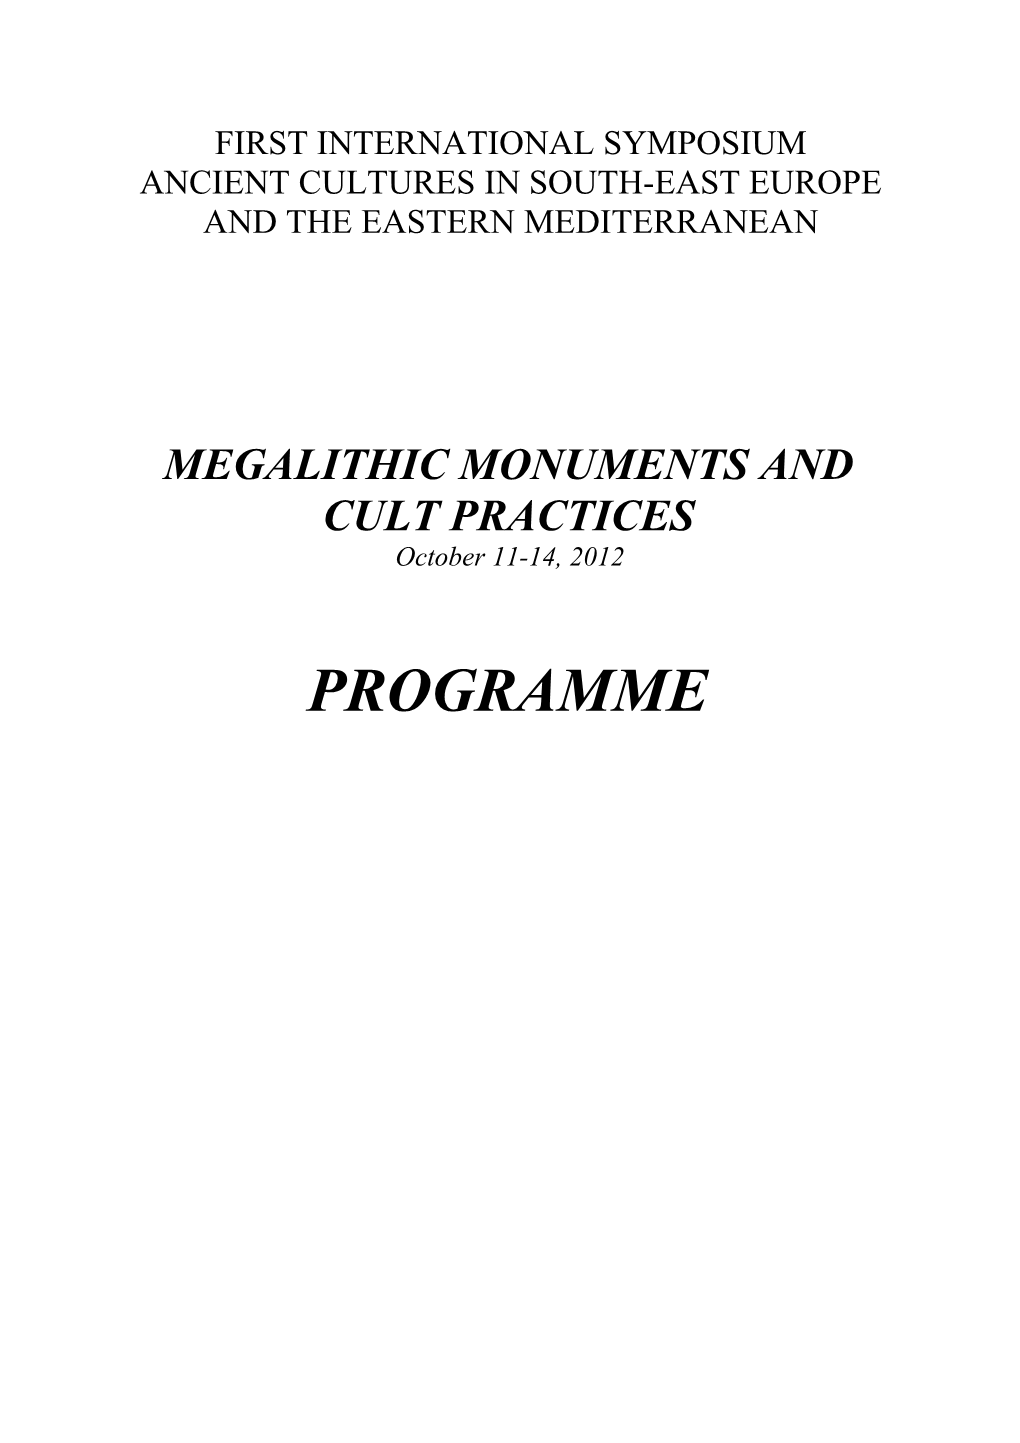 Megalithic Monuments and Cult Practices